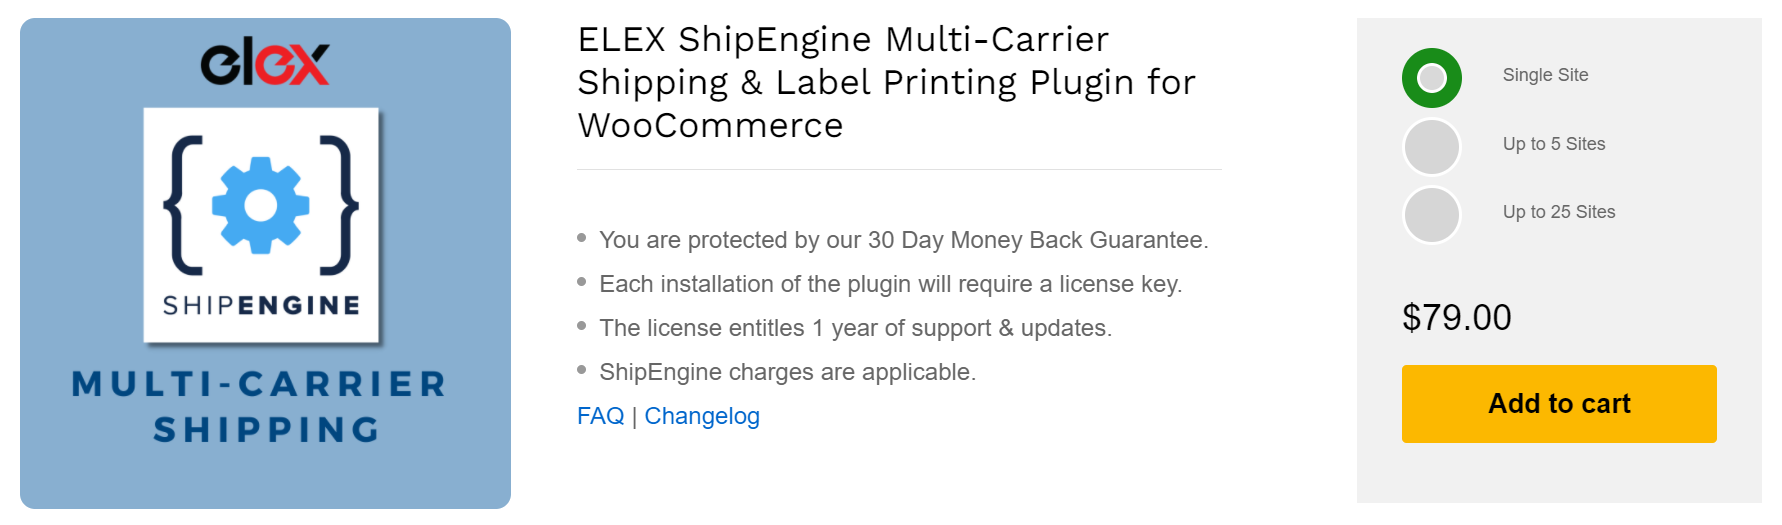 Print UPS Shipping Label | ELEX ShipEngine Multi-Carrier Shipping & Label Printing Plugin for WooCommerce.